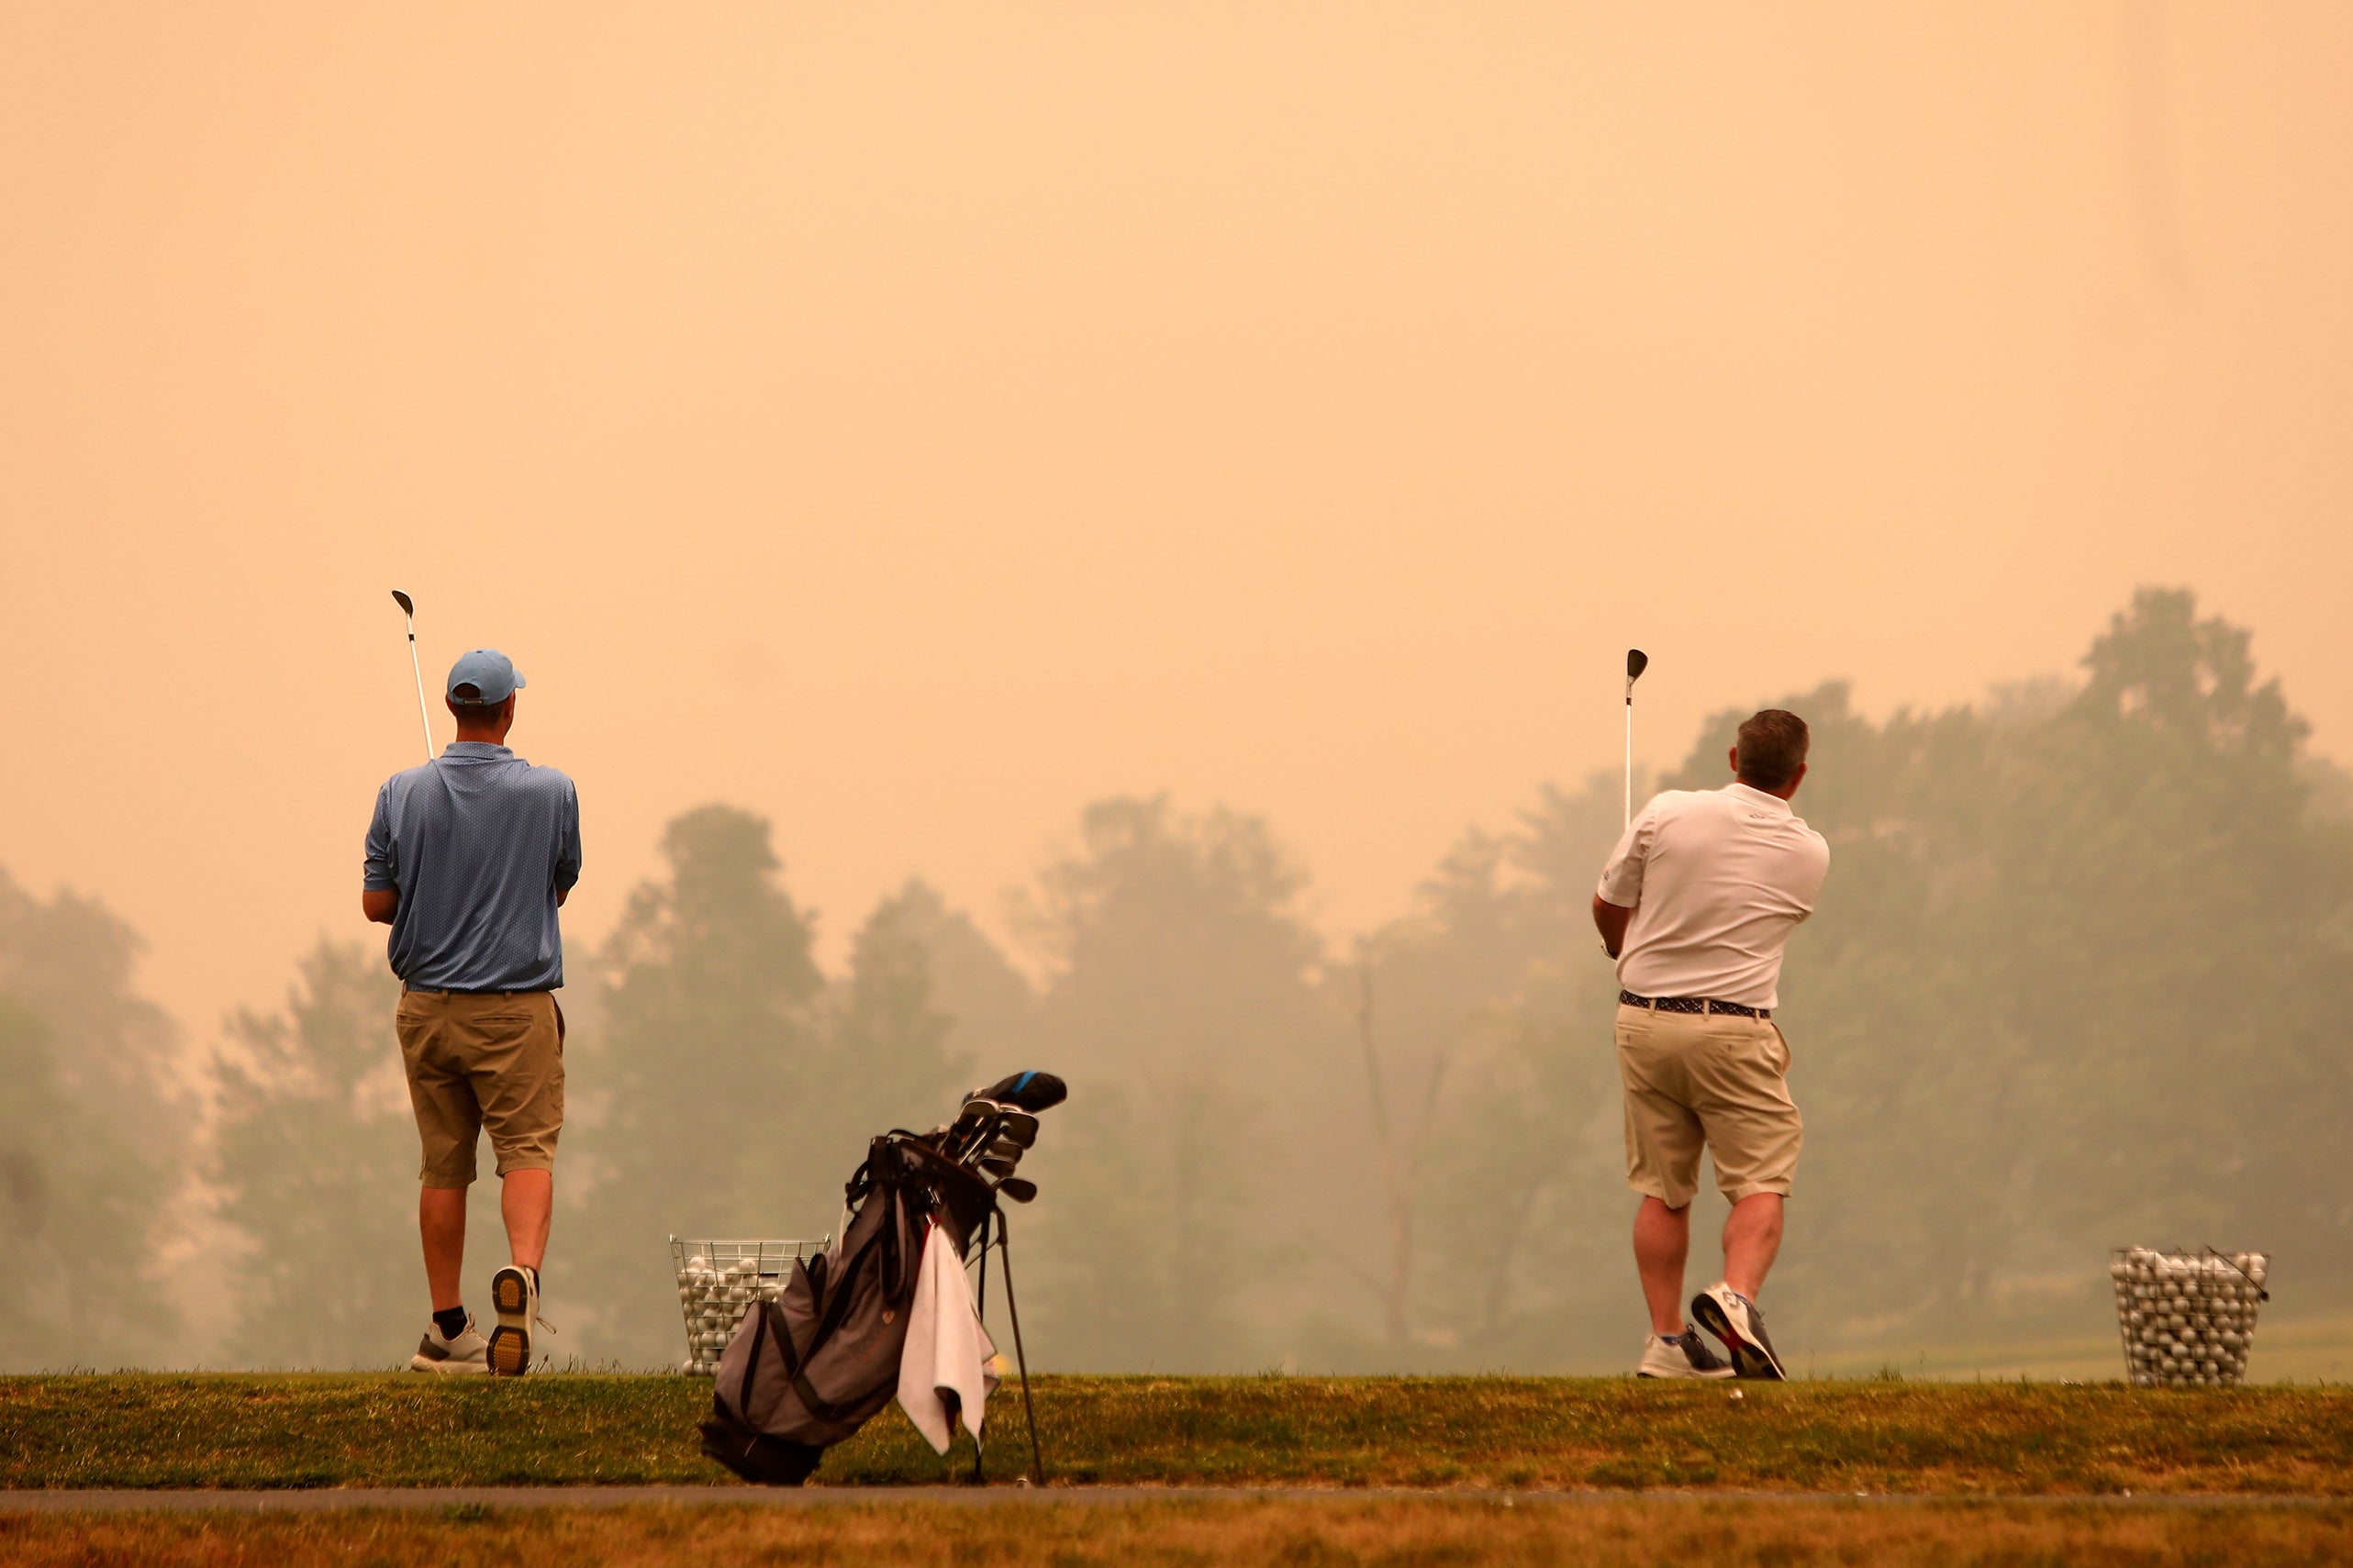 Golfers watch their shots at the driving range at Valley Country Club in Sugarloaf, Pennsylvania as smoke from wildfires in Canada fill the air on Wednesday